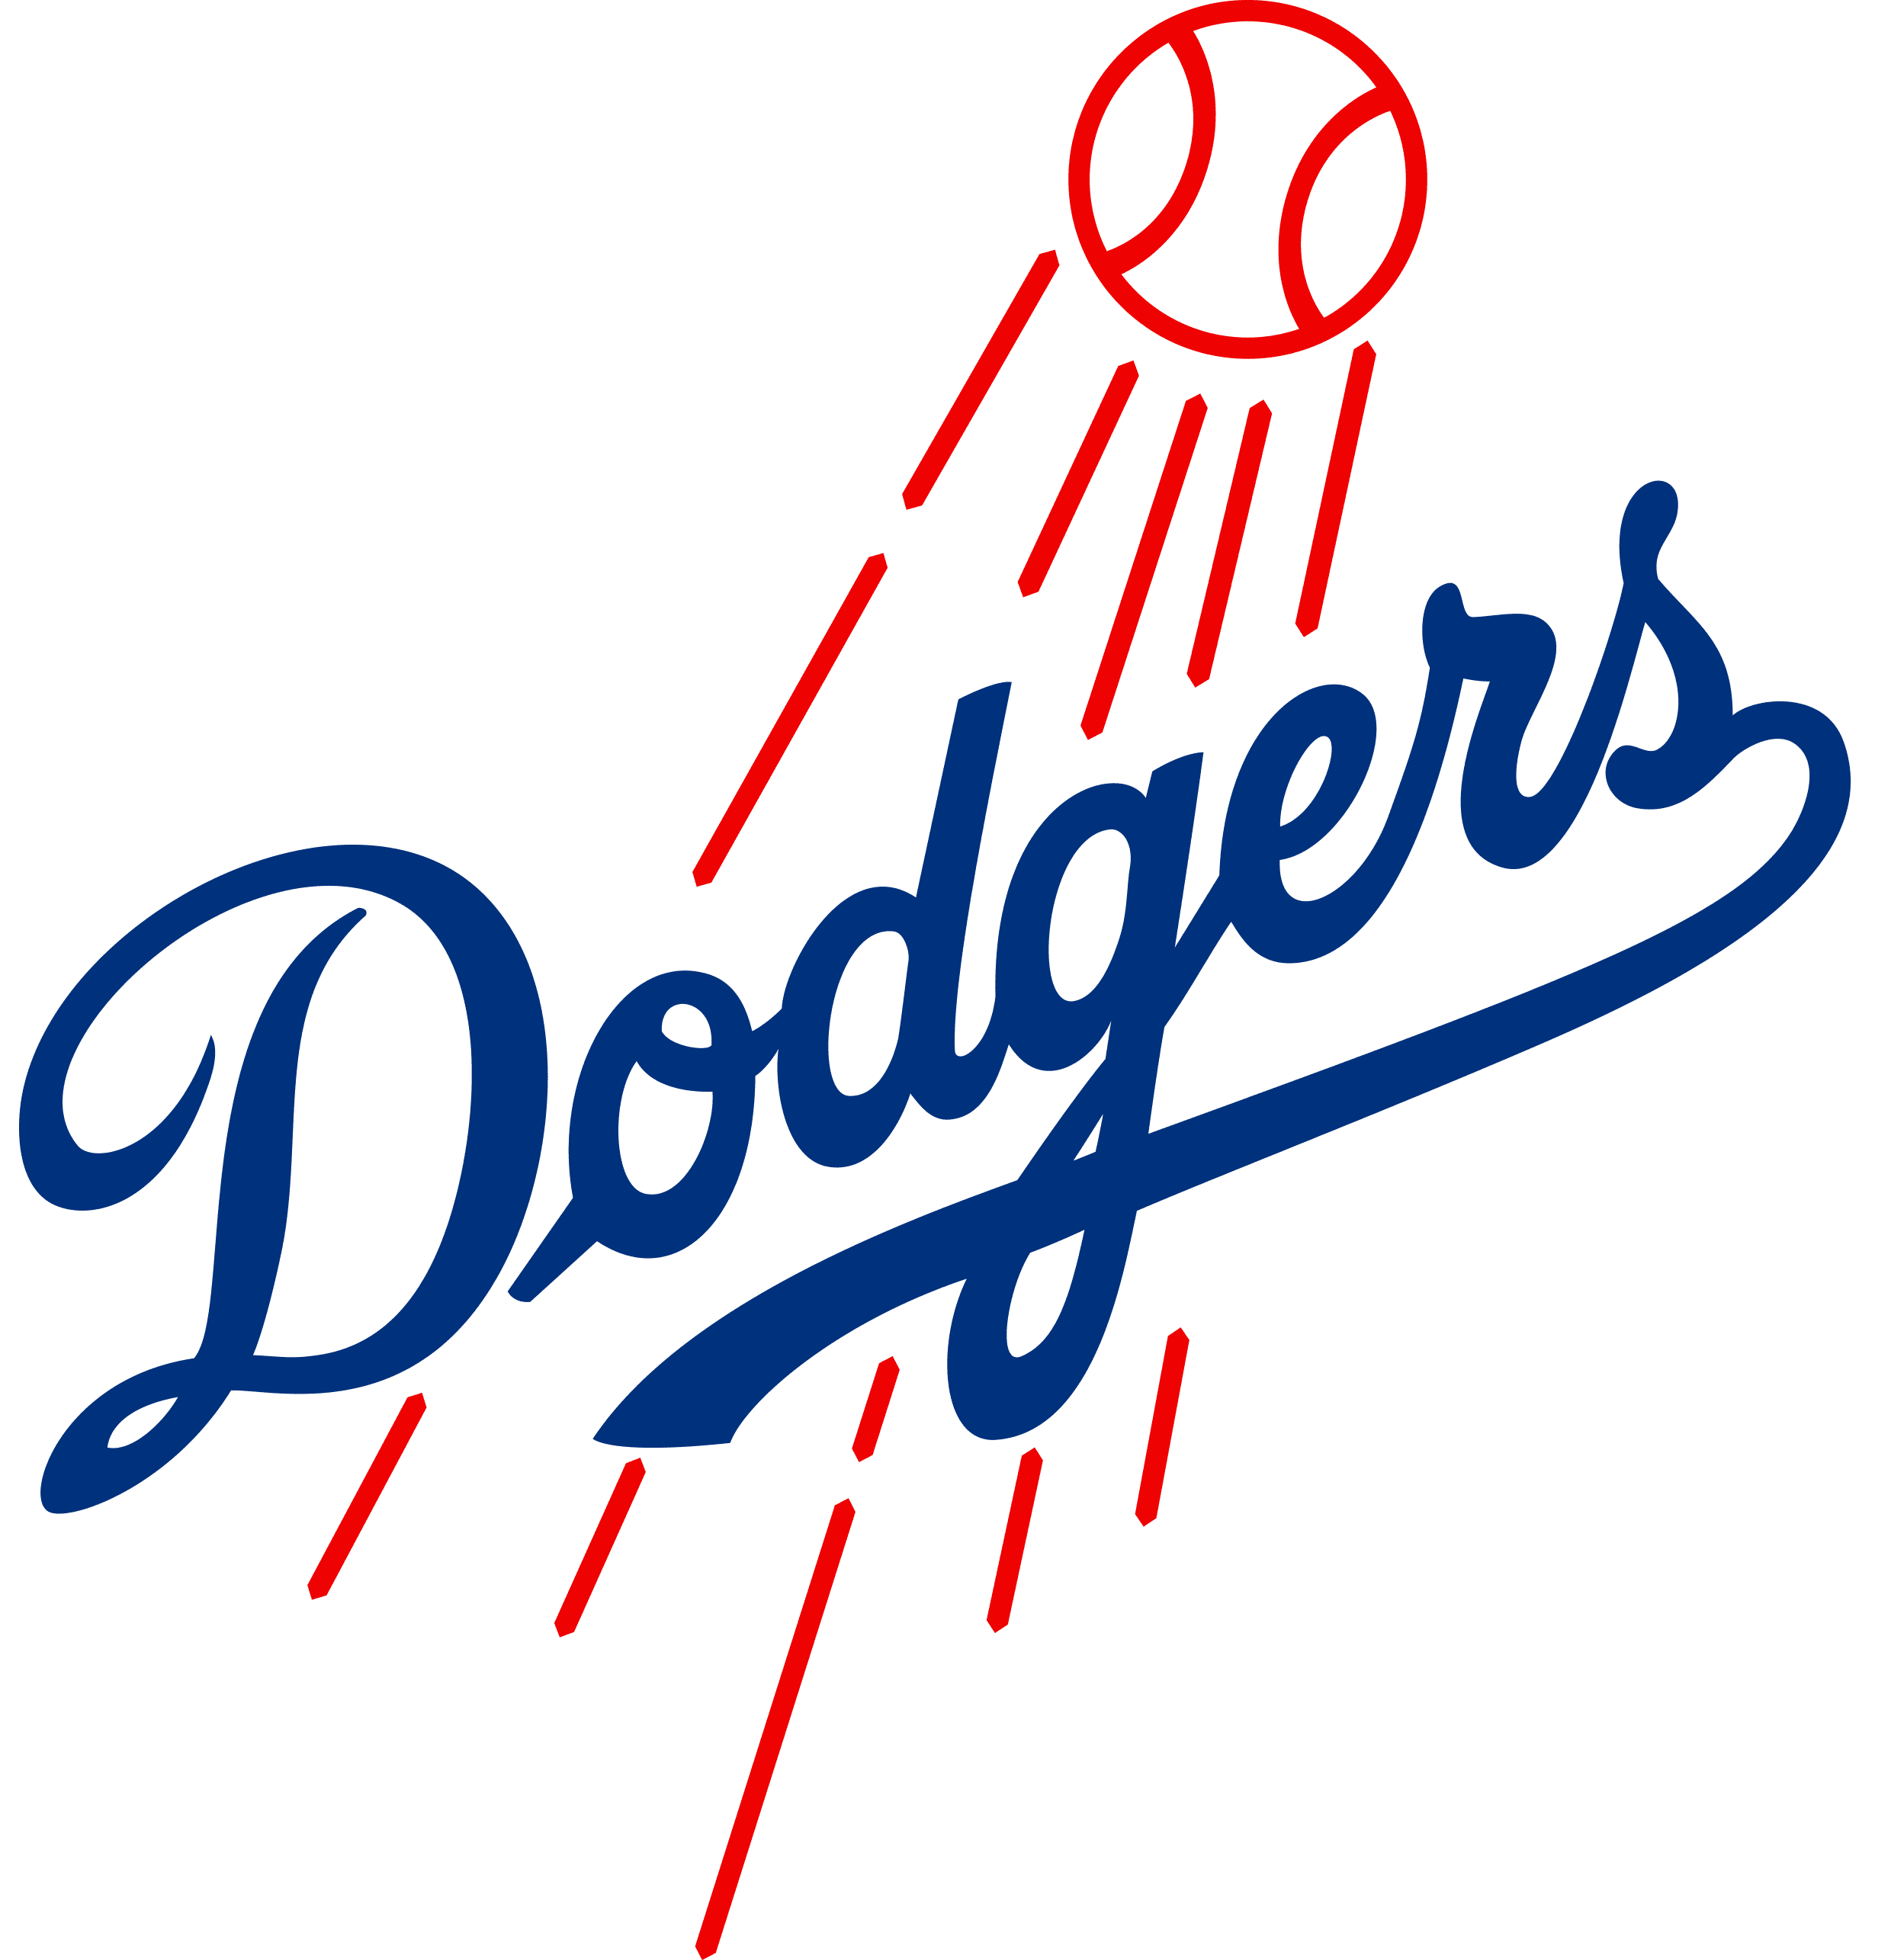 Vamos Los Doyers printable design - SVG and PNG files included.